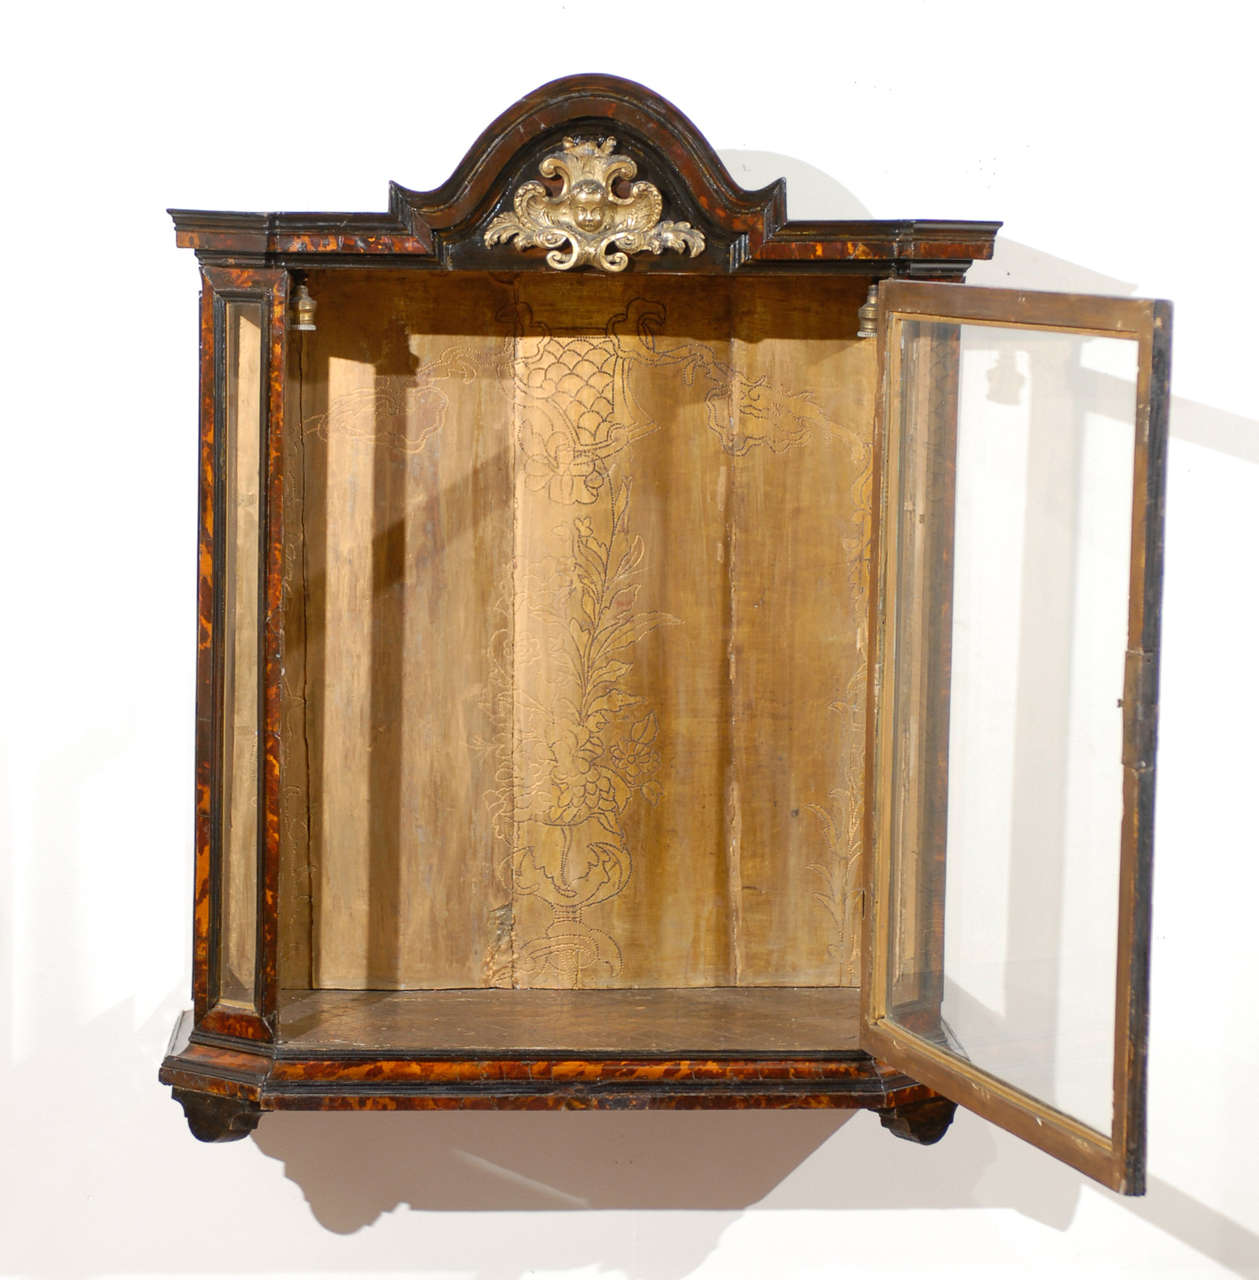 Tortoised Curio Cabinet with Glass 1